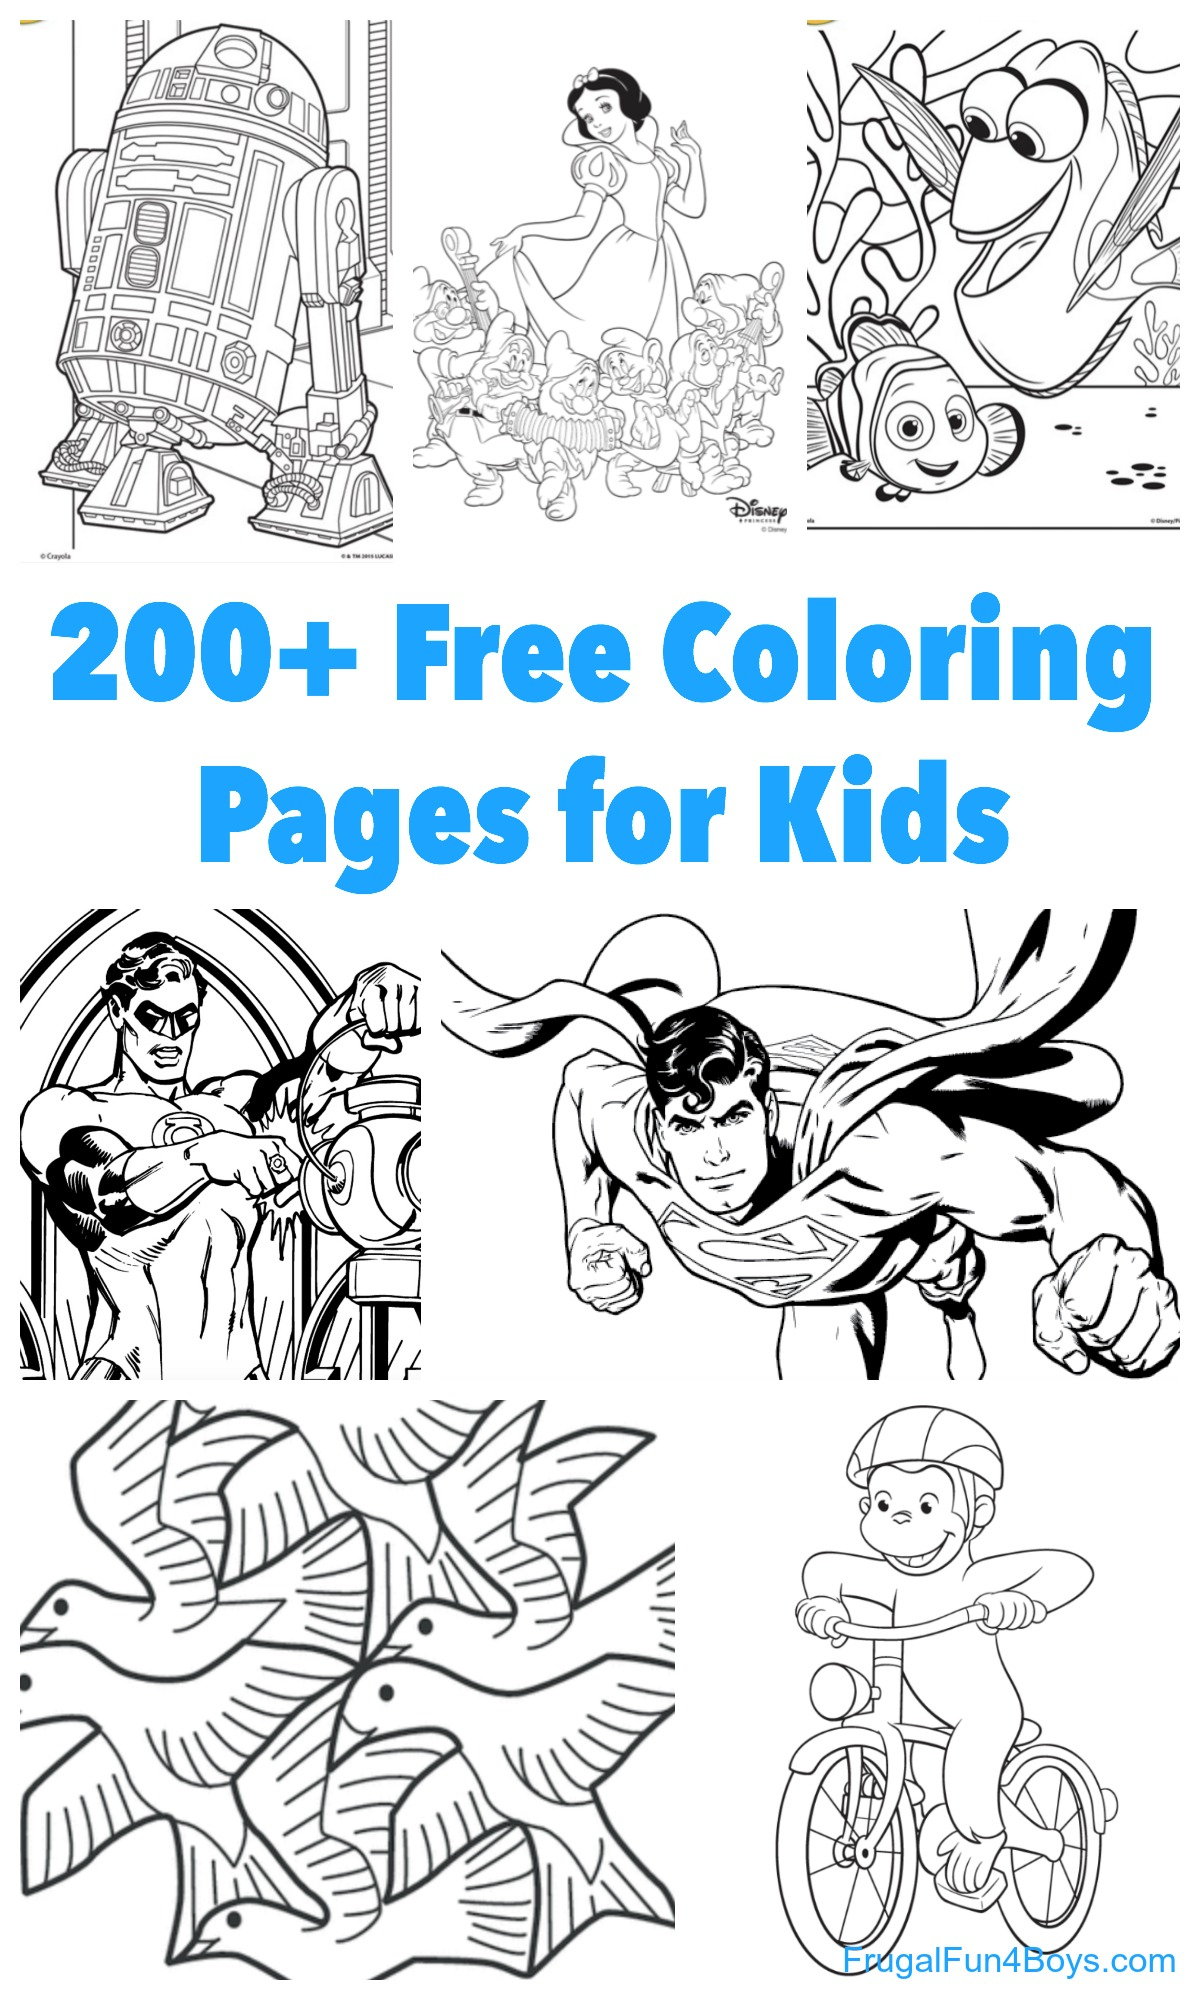 Printables Coloring Pages 200 Printable Coloring Pages For Kids Frugal Fun For Boys And Girls